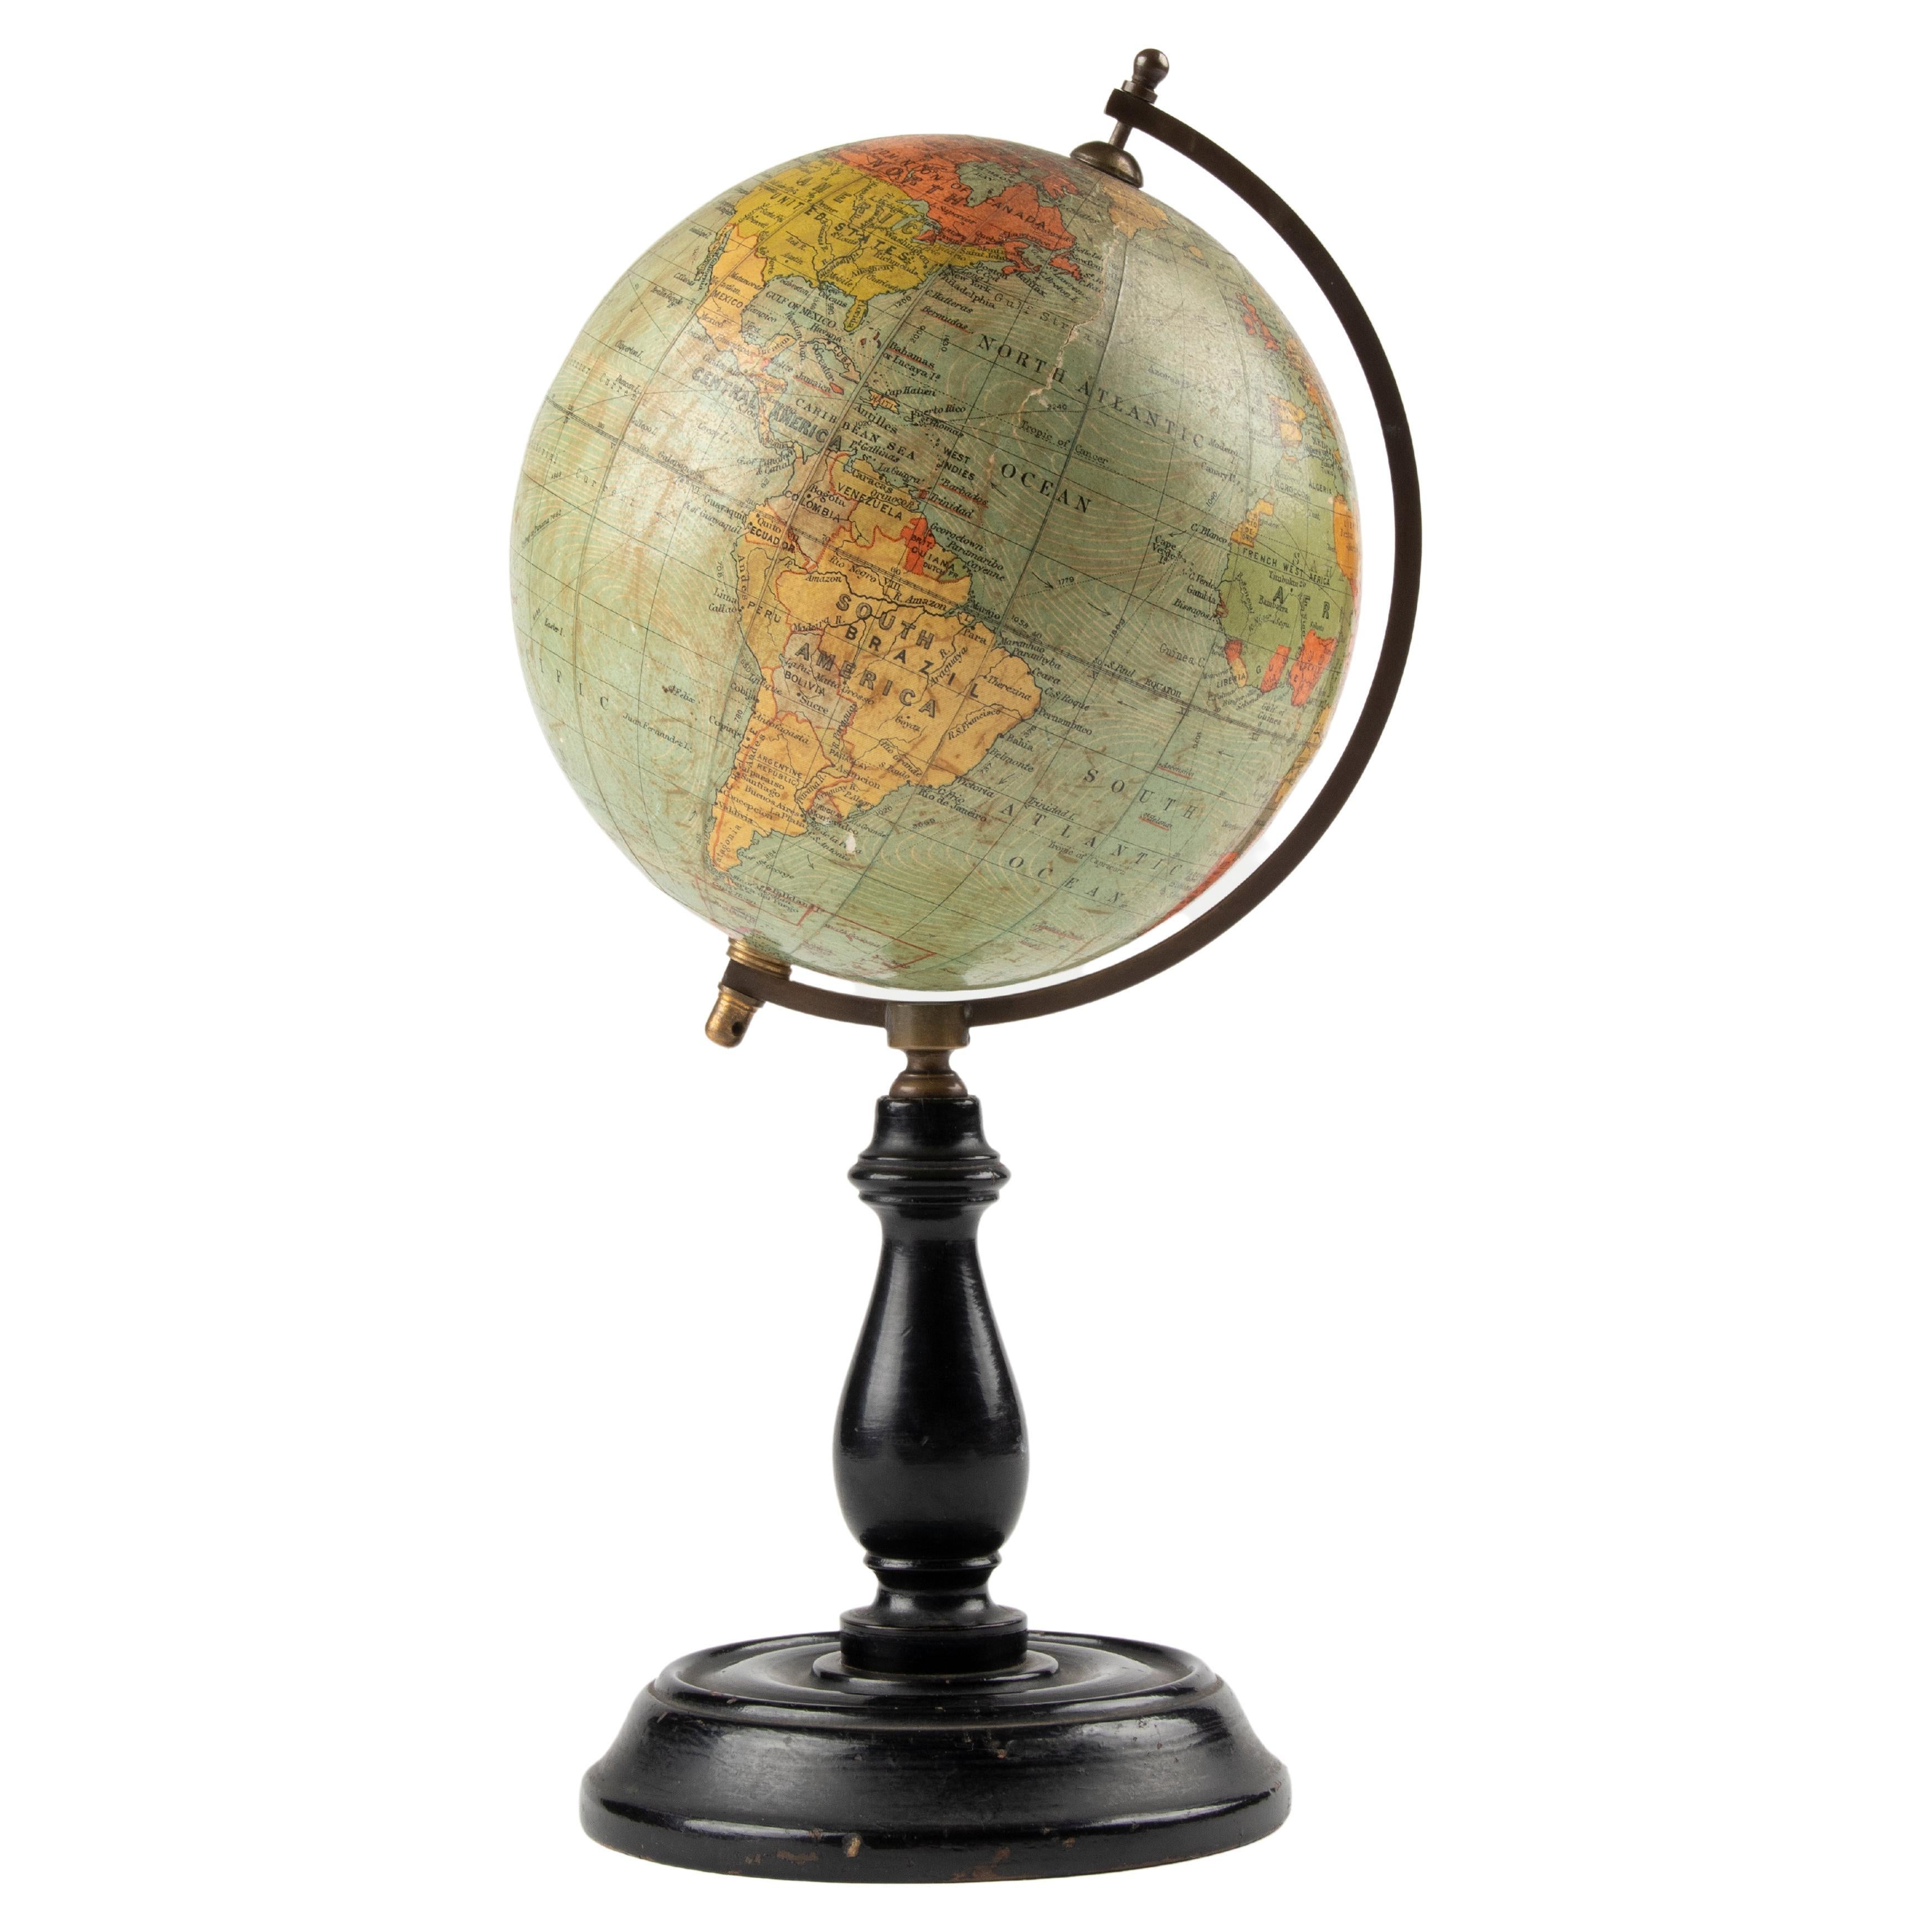 Late 19th Century Small Size Globe Edited by Philips Terrestrial London